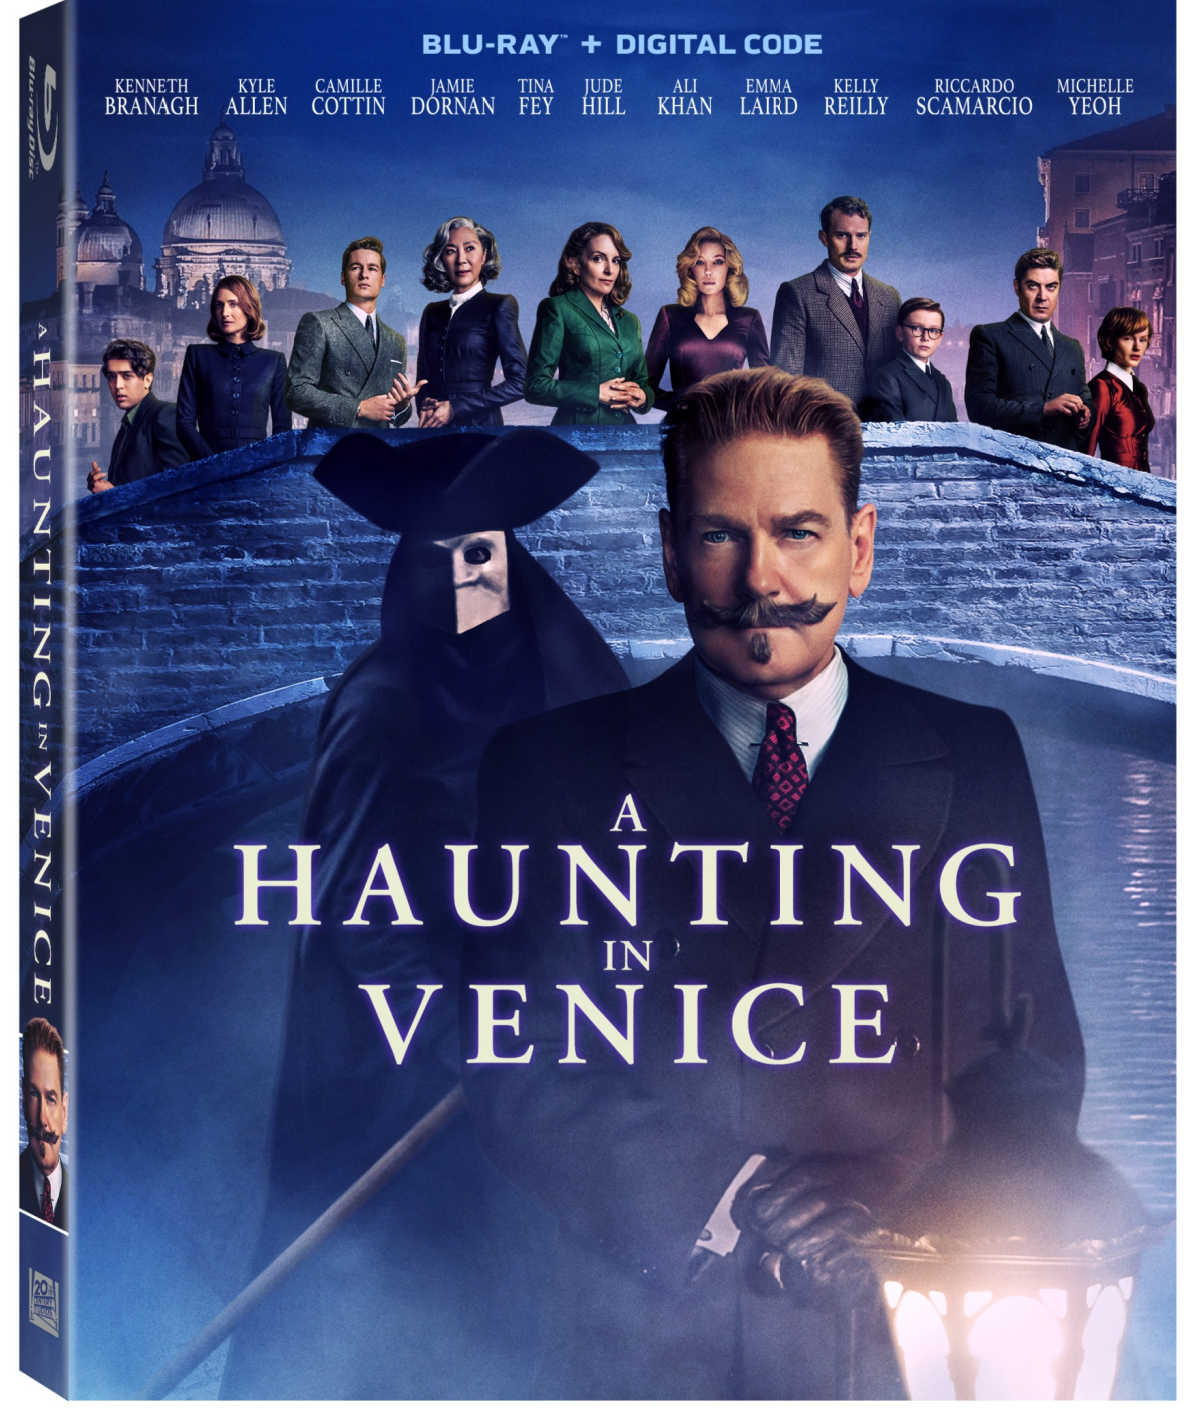 Unravel the mystery of A Haunting in Venice, a captivating film inspired by Agatha Christie's beloved novel, Hallowe'en Party, which is now available on Blu-ray and digital. Hercule Poirot returns to solve a chilling case set in post-World War II Venice. Experience the film in high definition and immerse yourself in its suspenseful atmosphere.